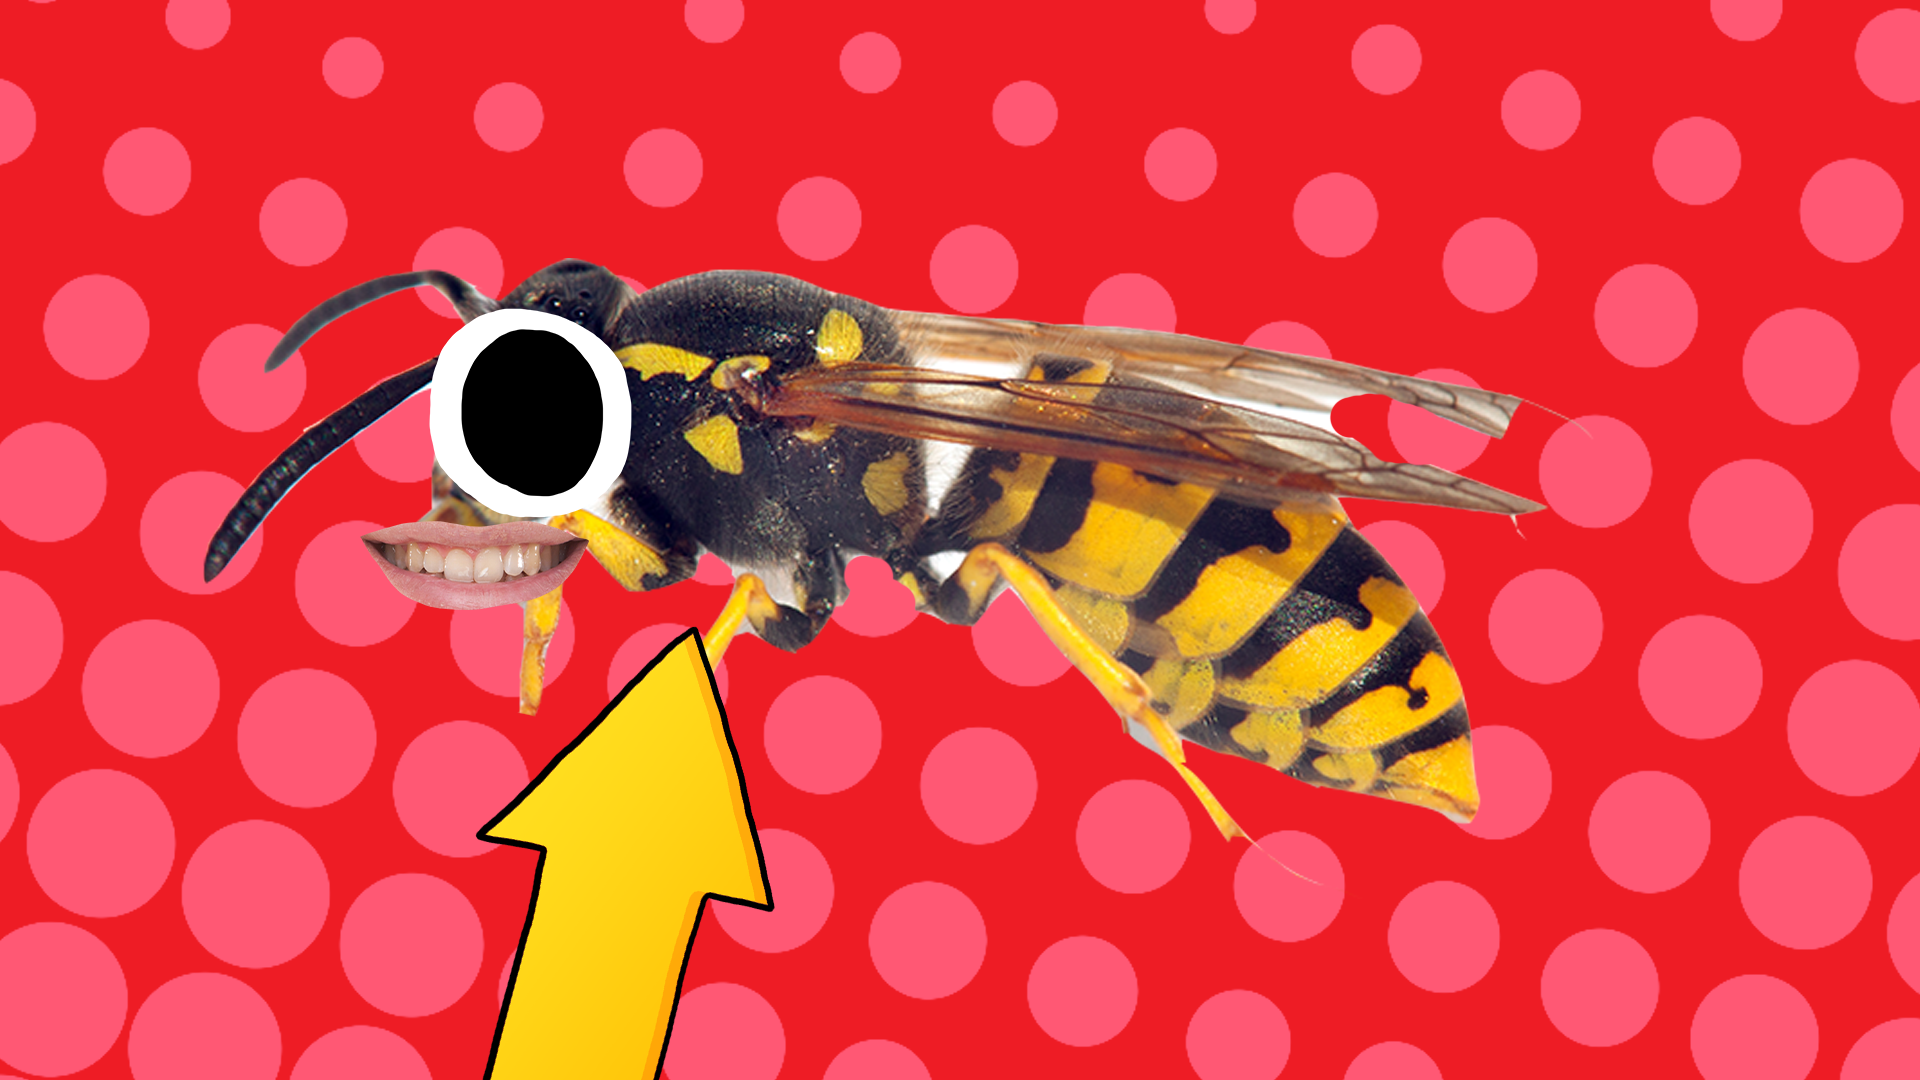 Smiley wasp with arrow on red background